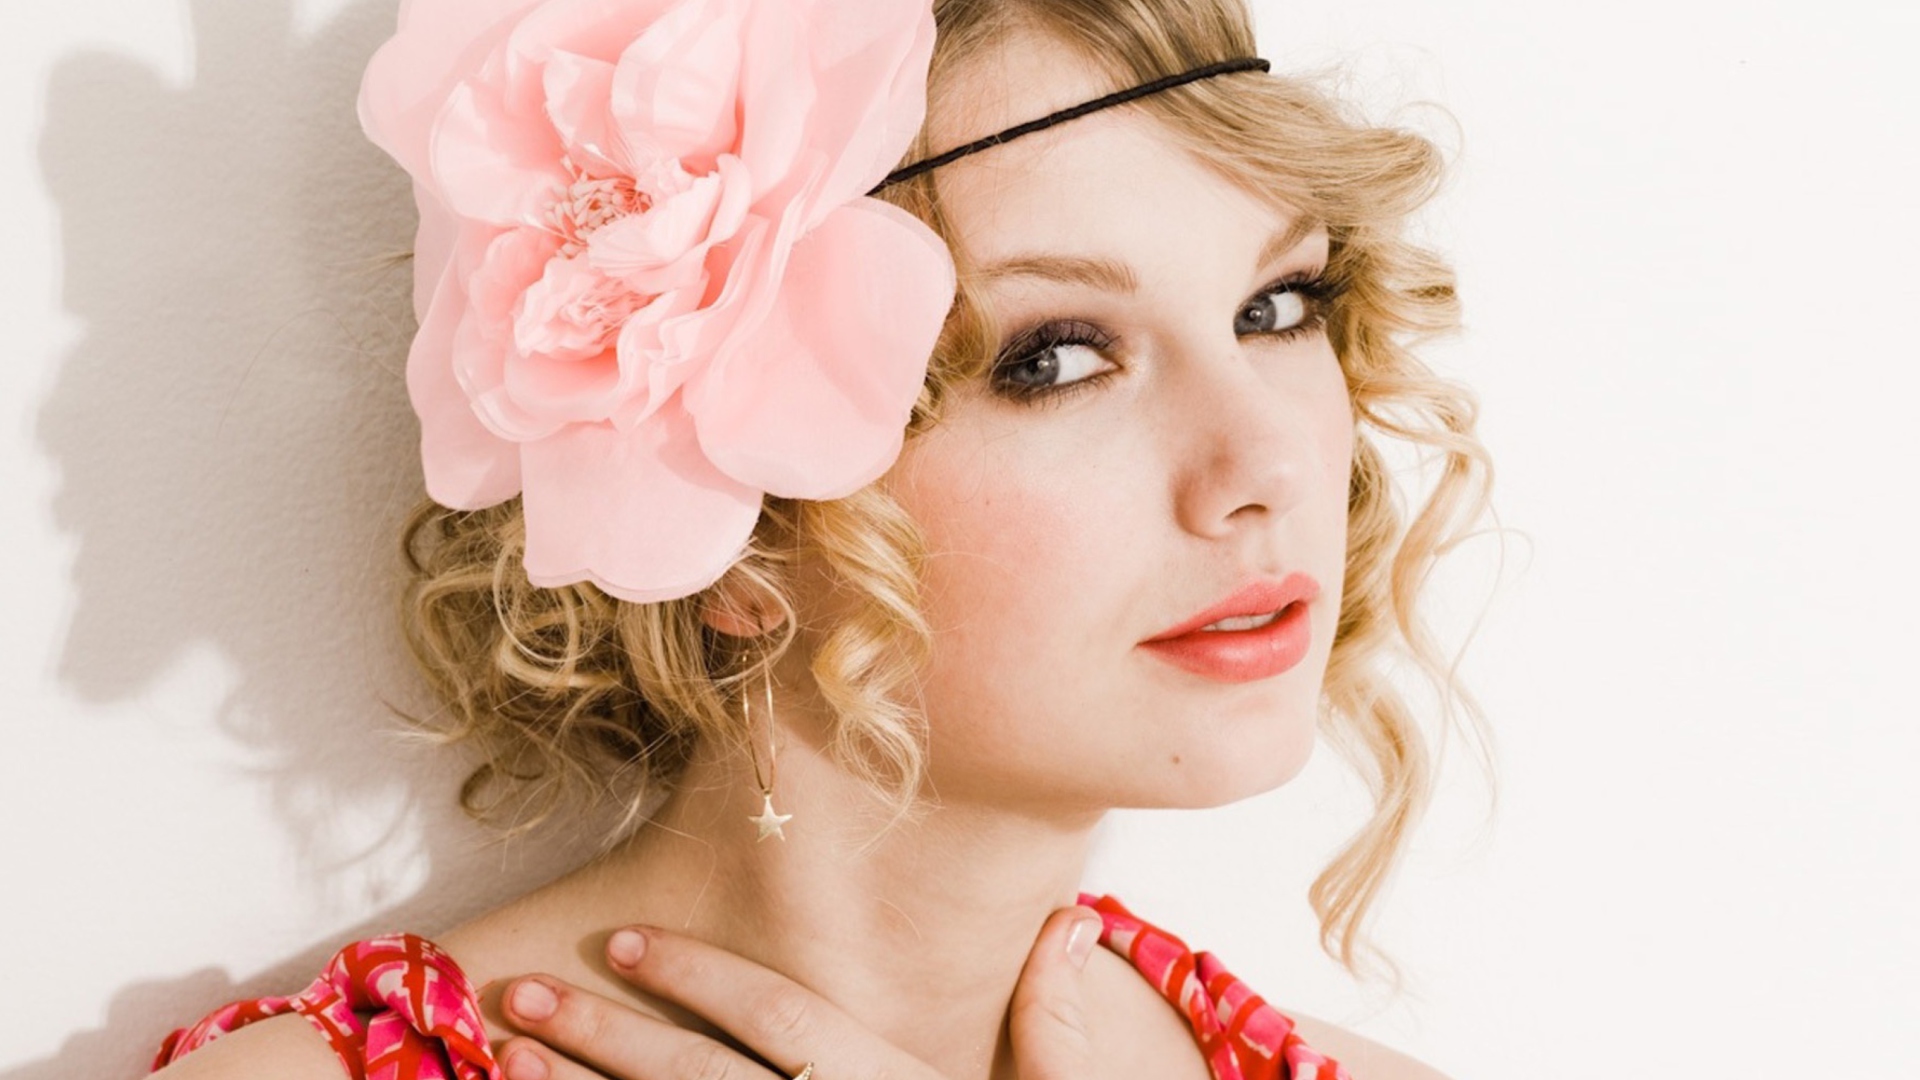 Taylor Swift With Pink Rose On Head wallpaper 1920x1080